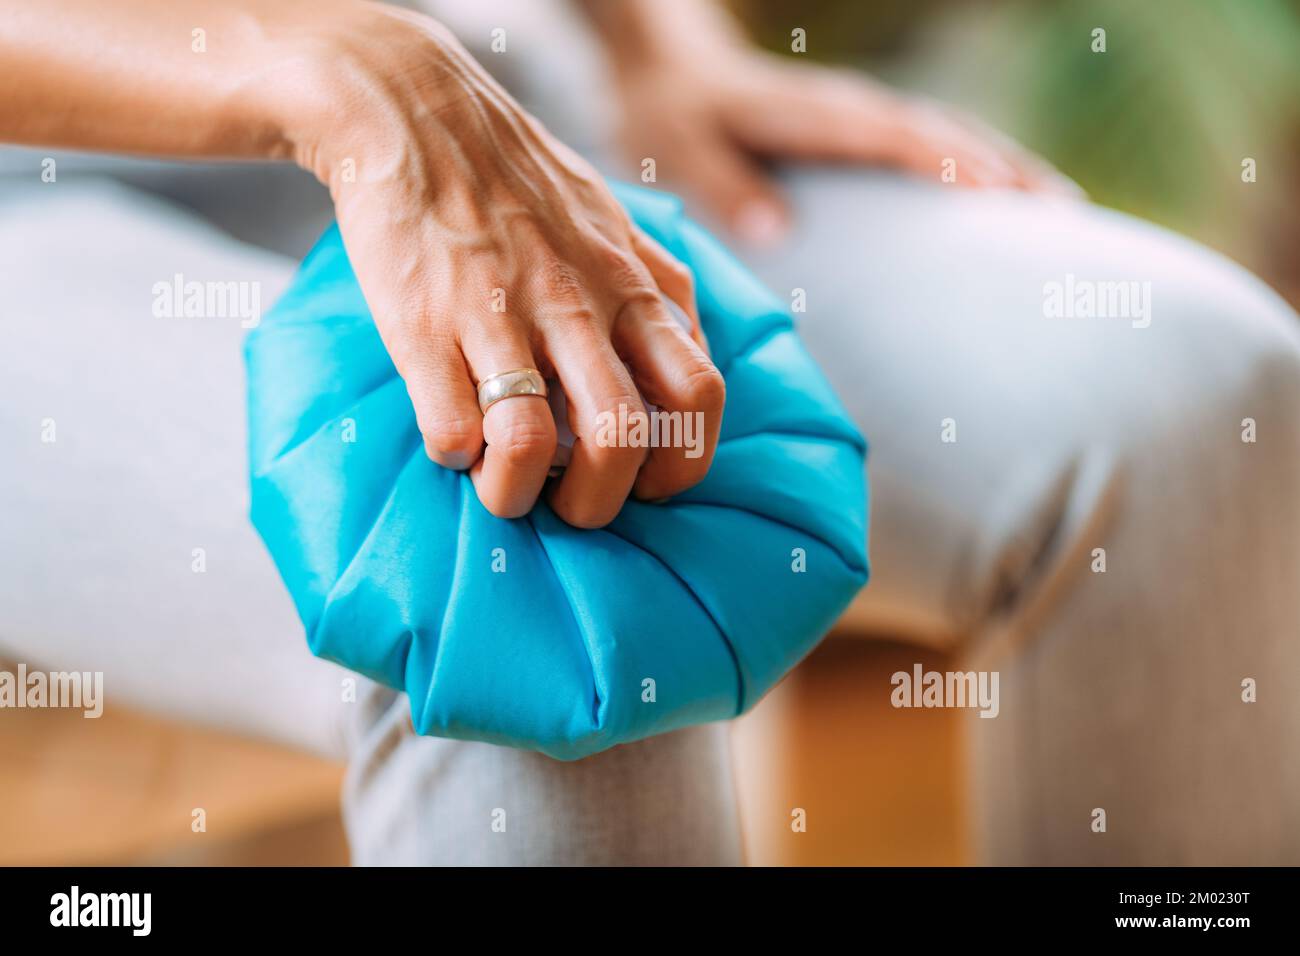 Woman holding an ice bag pack over a painful knee. Stock Photo